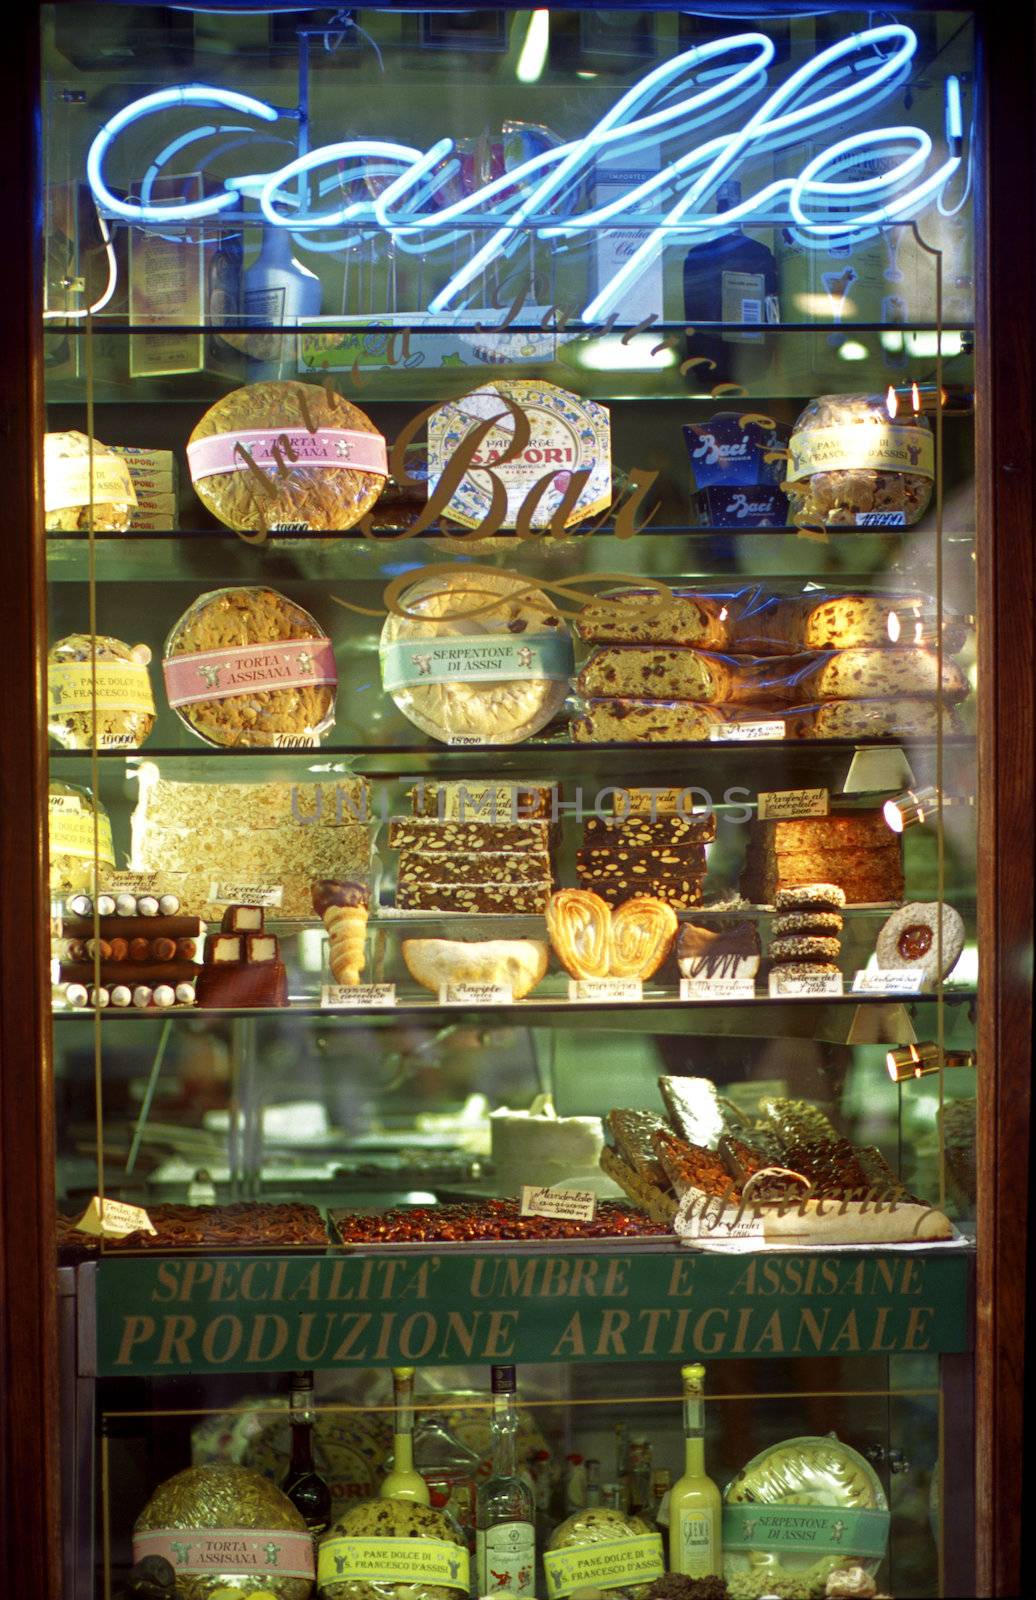 Café front Sienna Italy displaying baked goods.